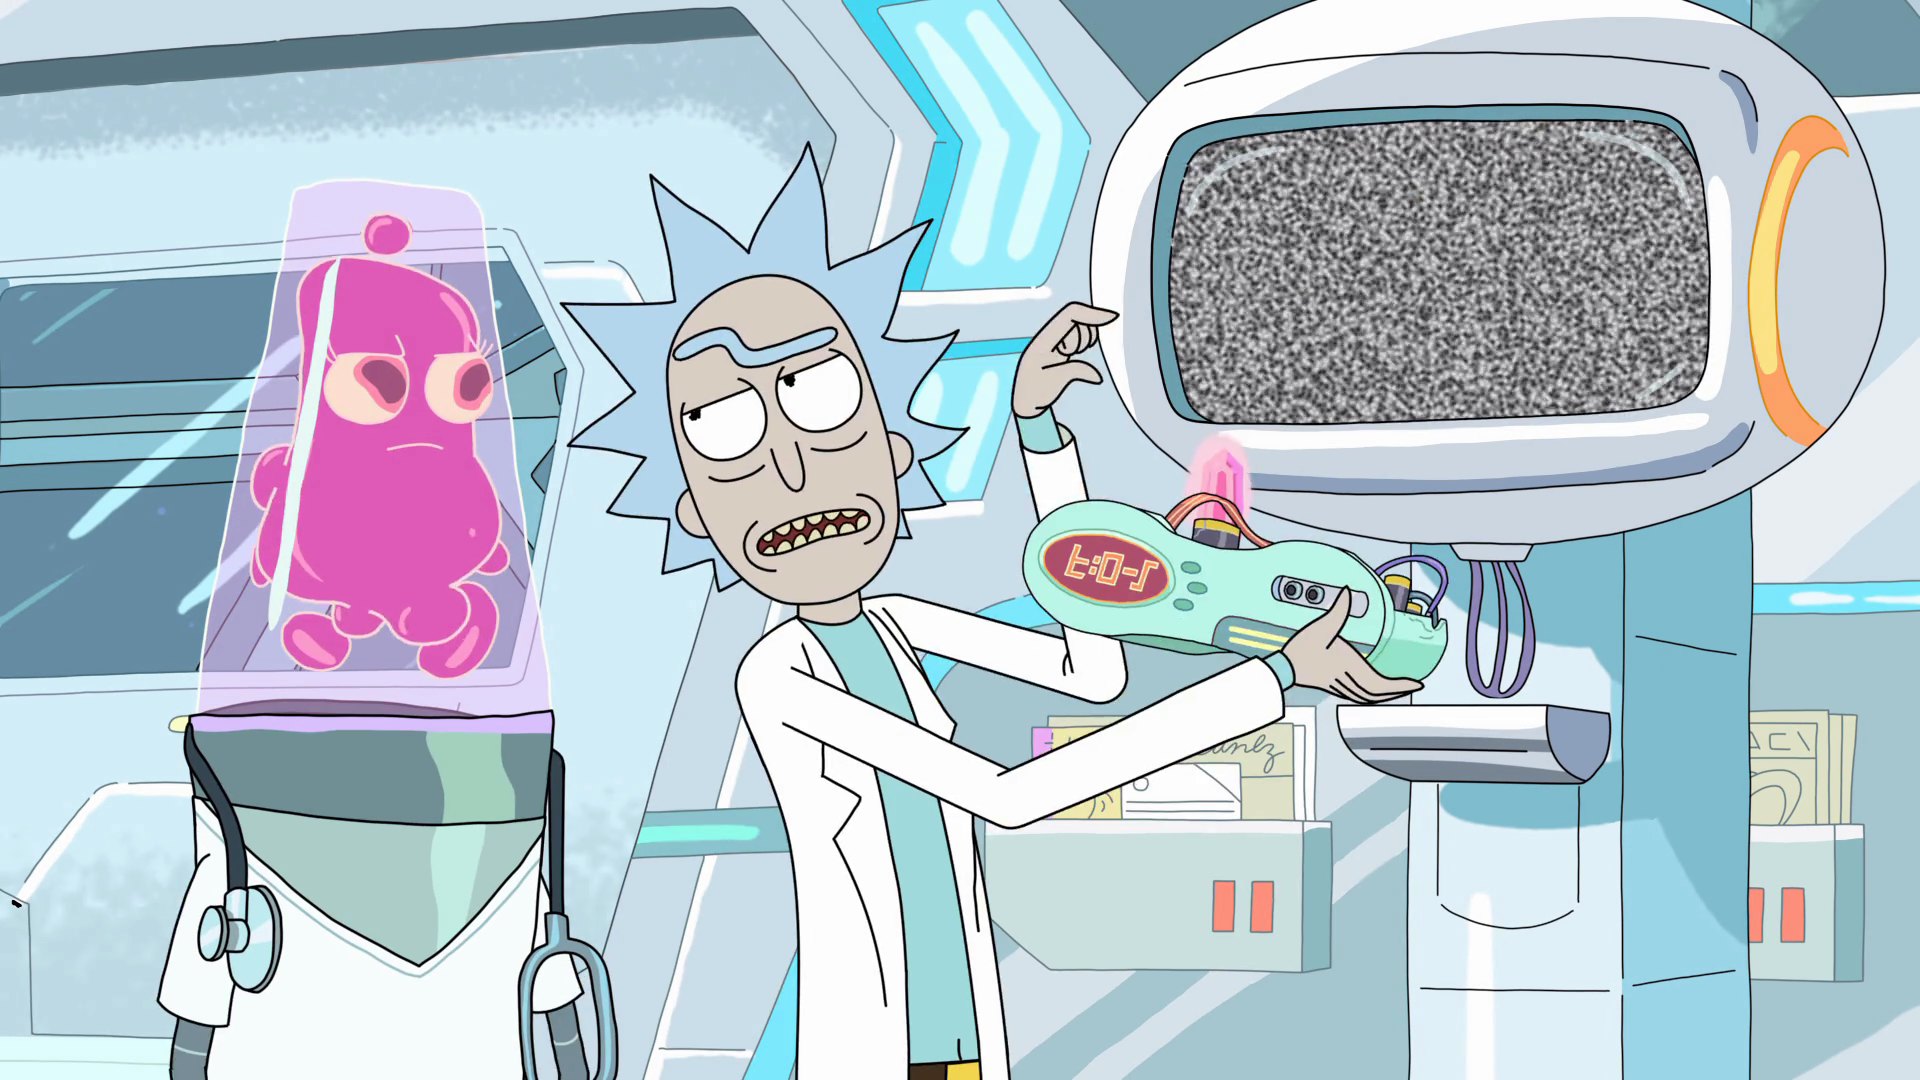 rick and morty season 2 episode 8 torrent